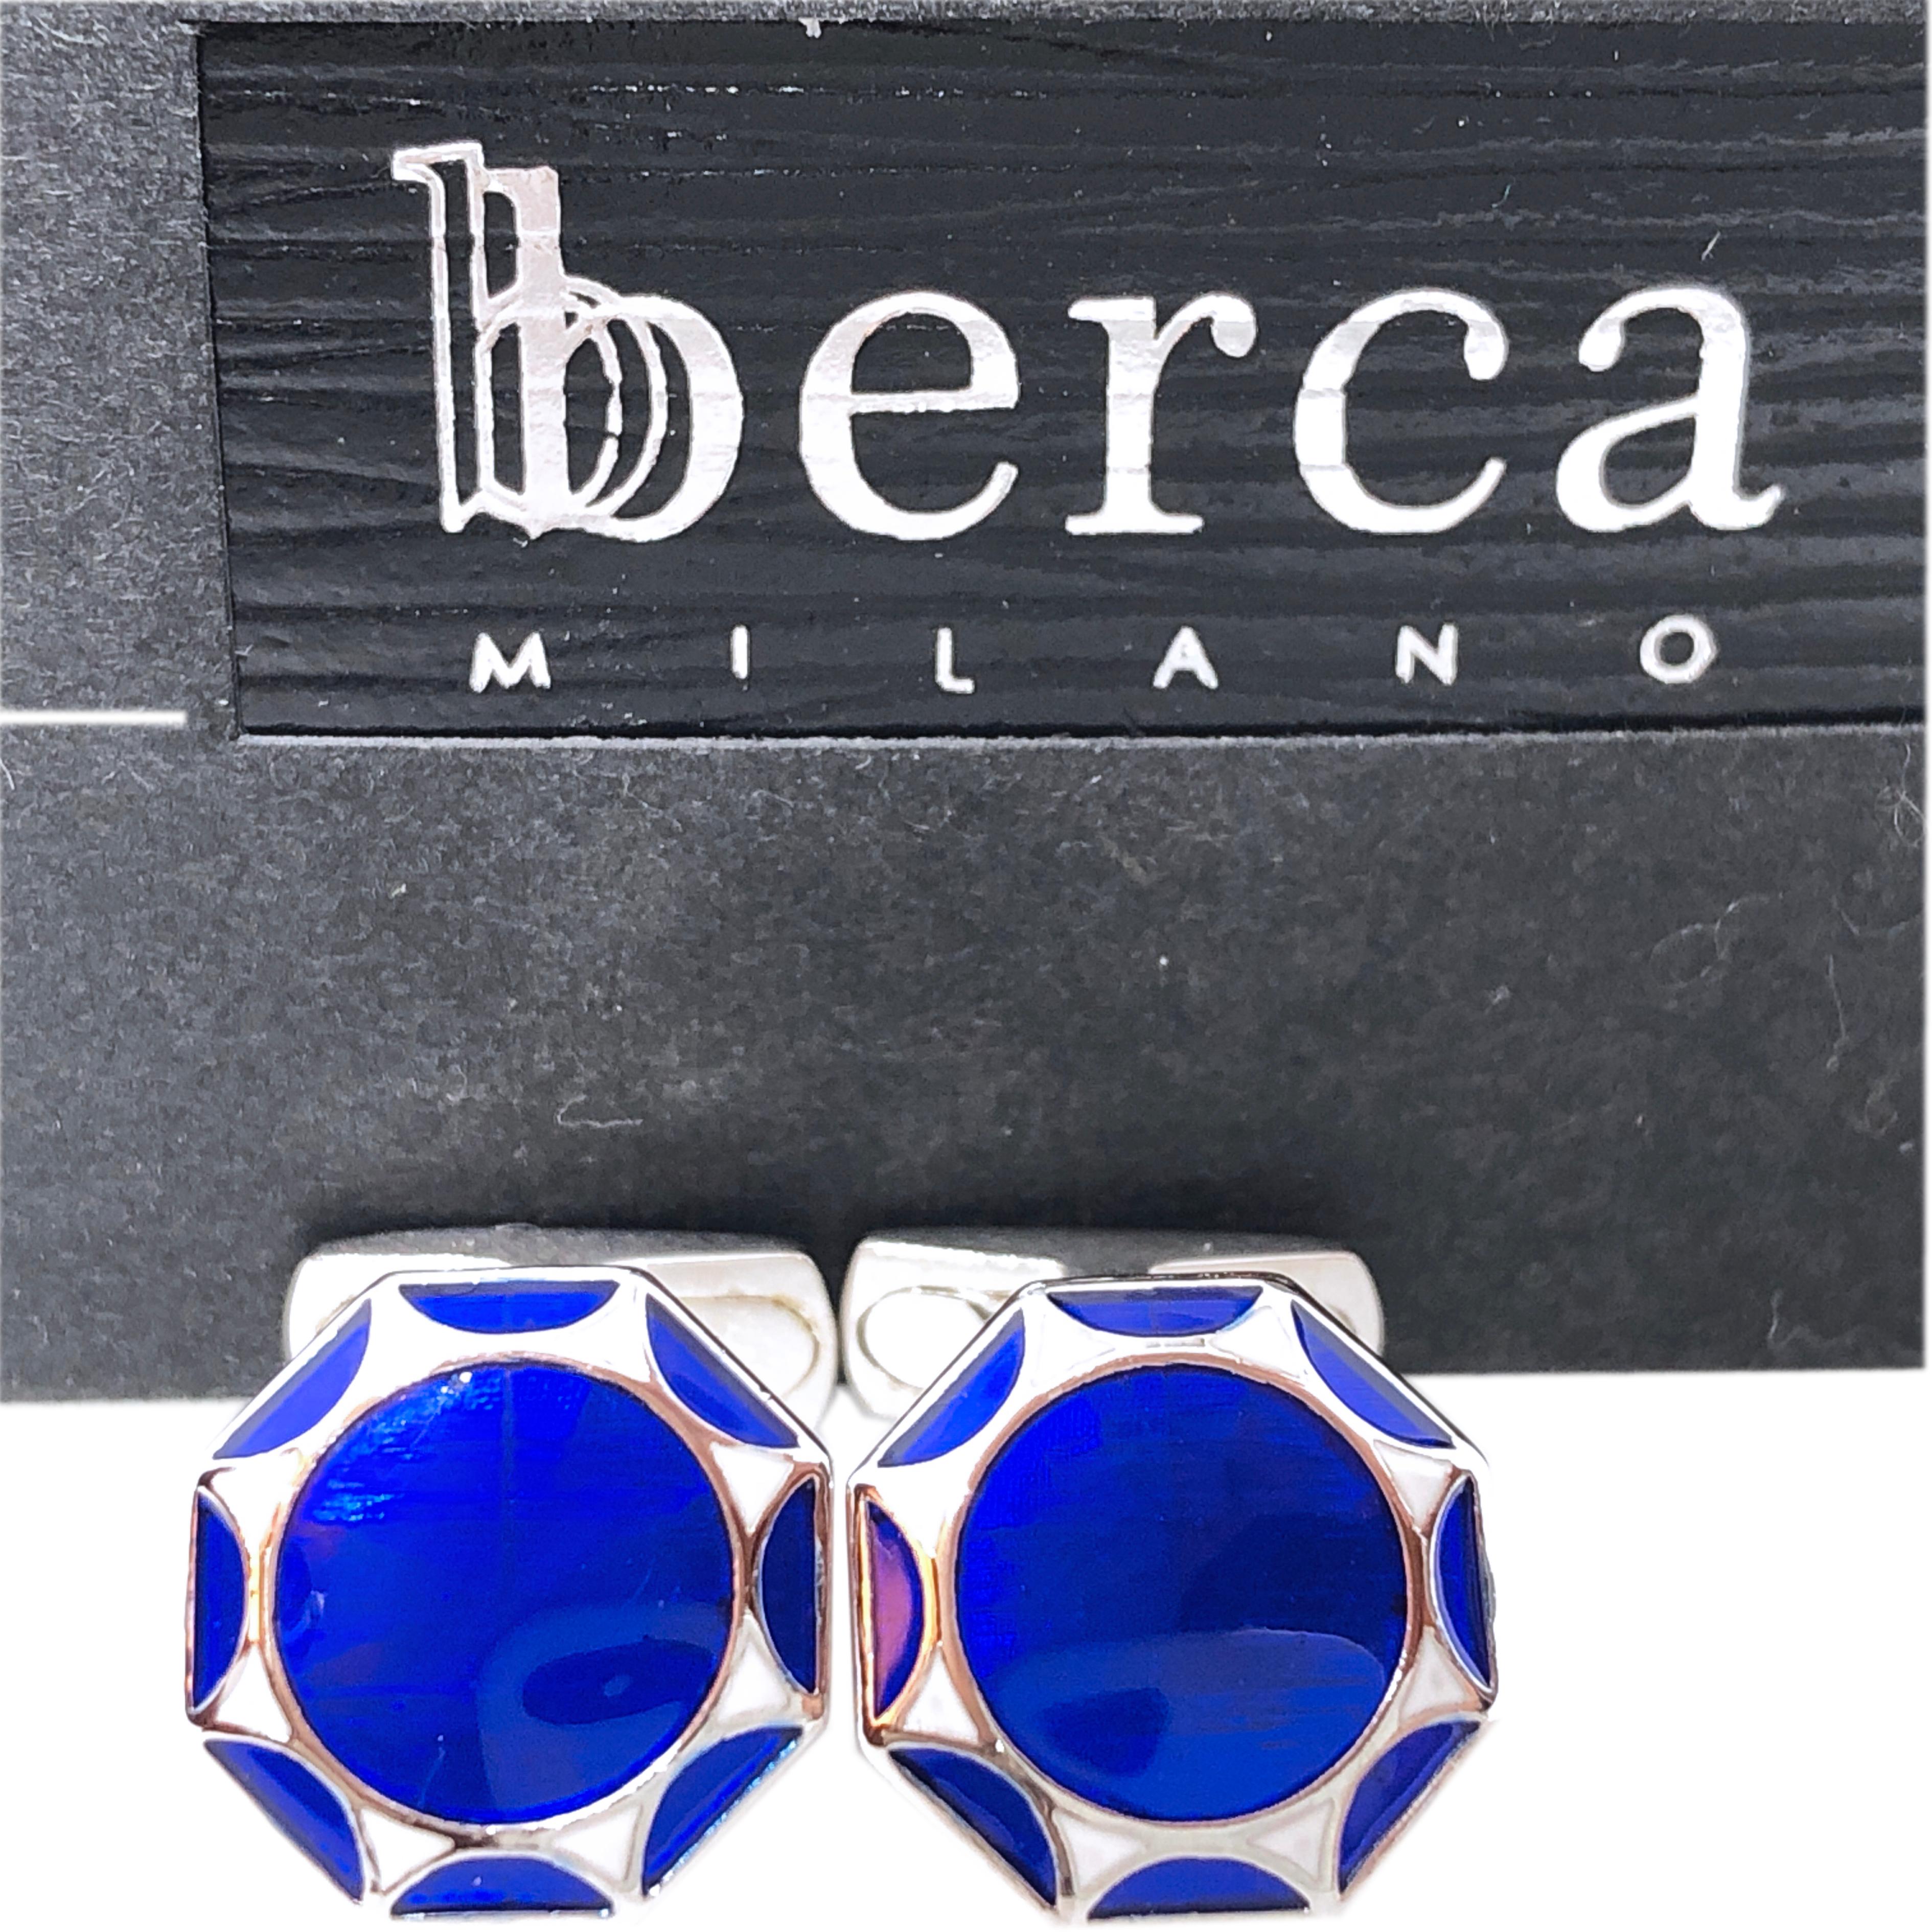 Chic yet Timeless Octagonal White, Navy Blue, Light Blue Hand Enamelled Sterling Silver Cufflinks, T-bar back.
In our Smart Black Box.

Front Diameter about 0.55 inches.